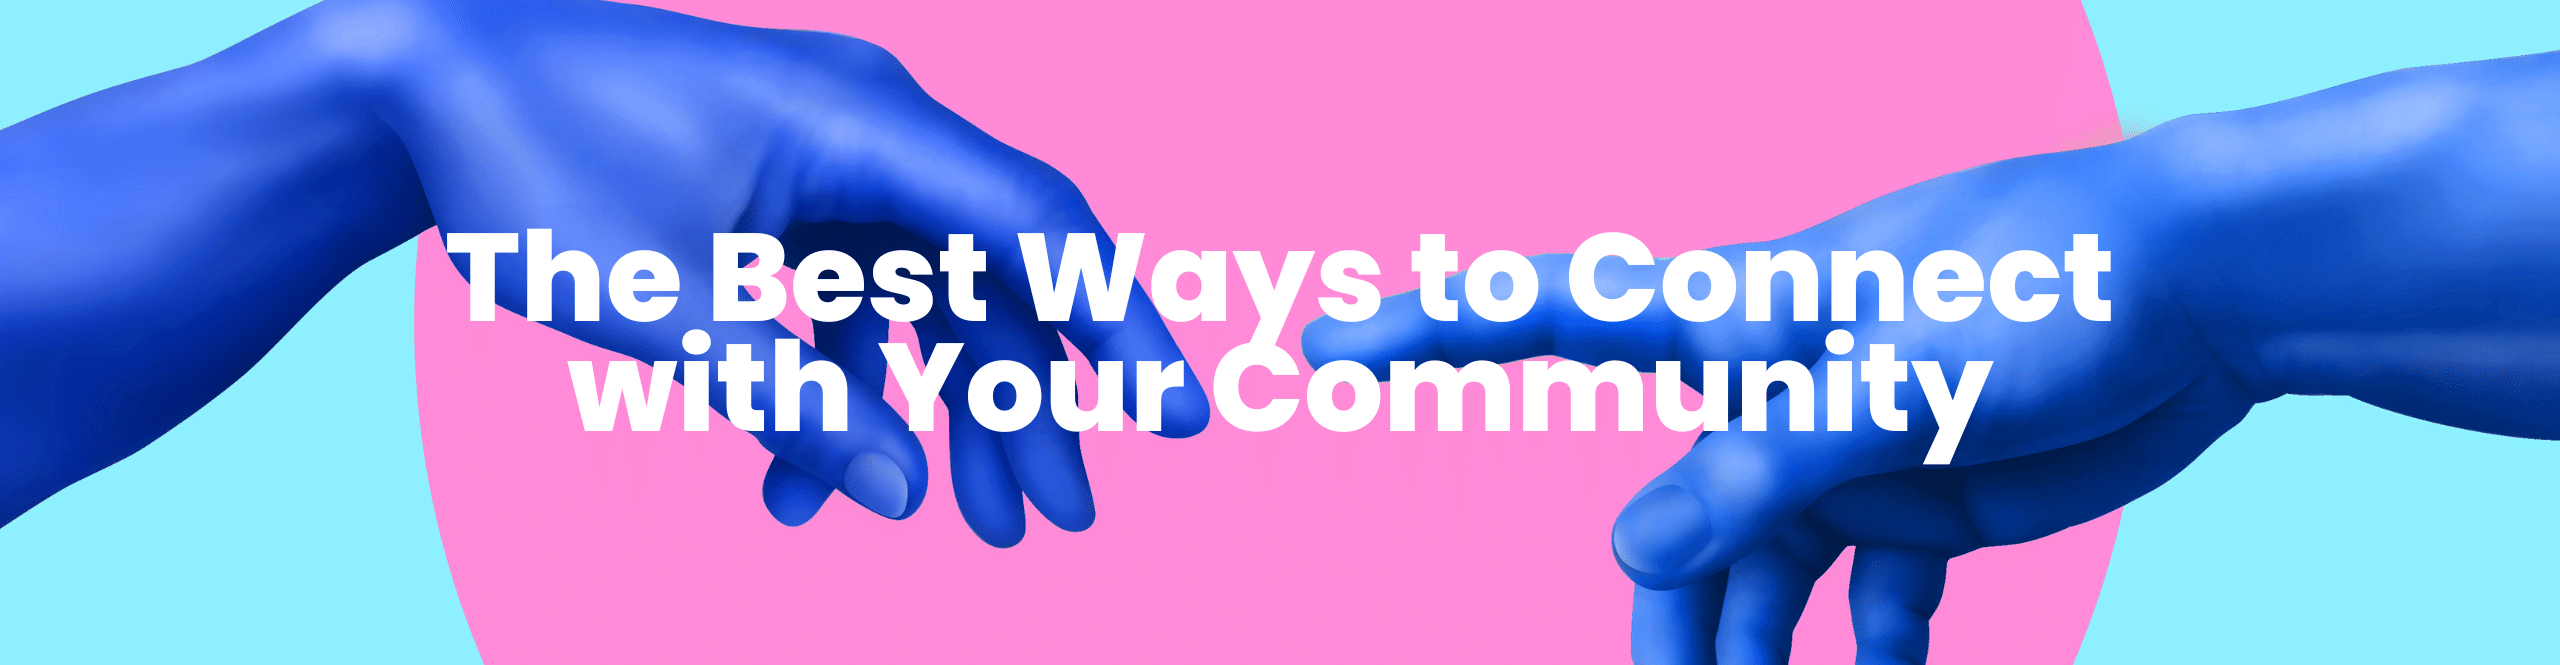 The Best Ways to Connect with Your Community